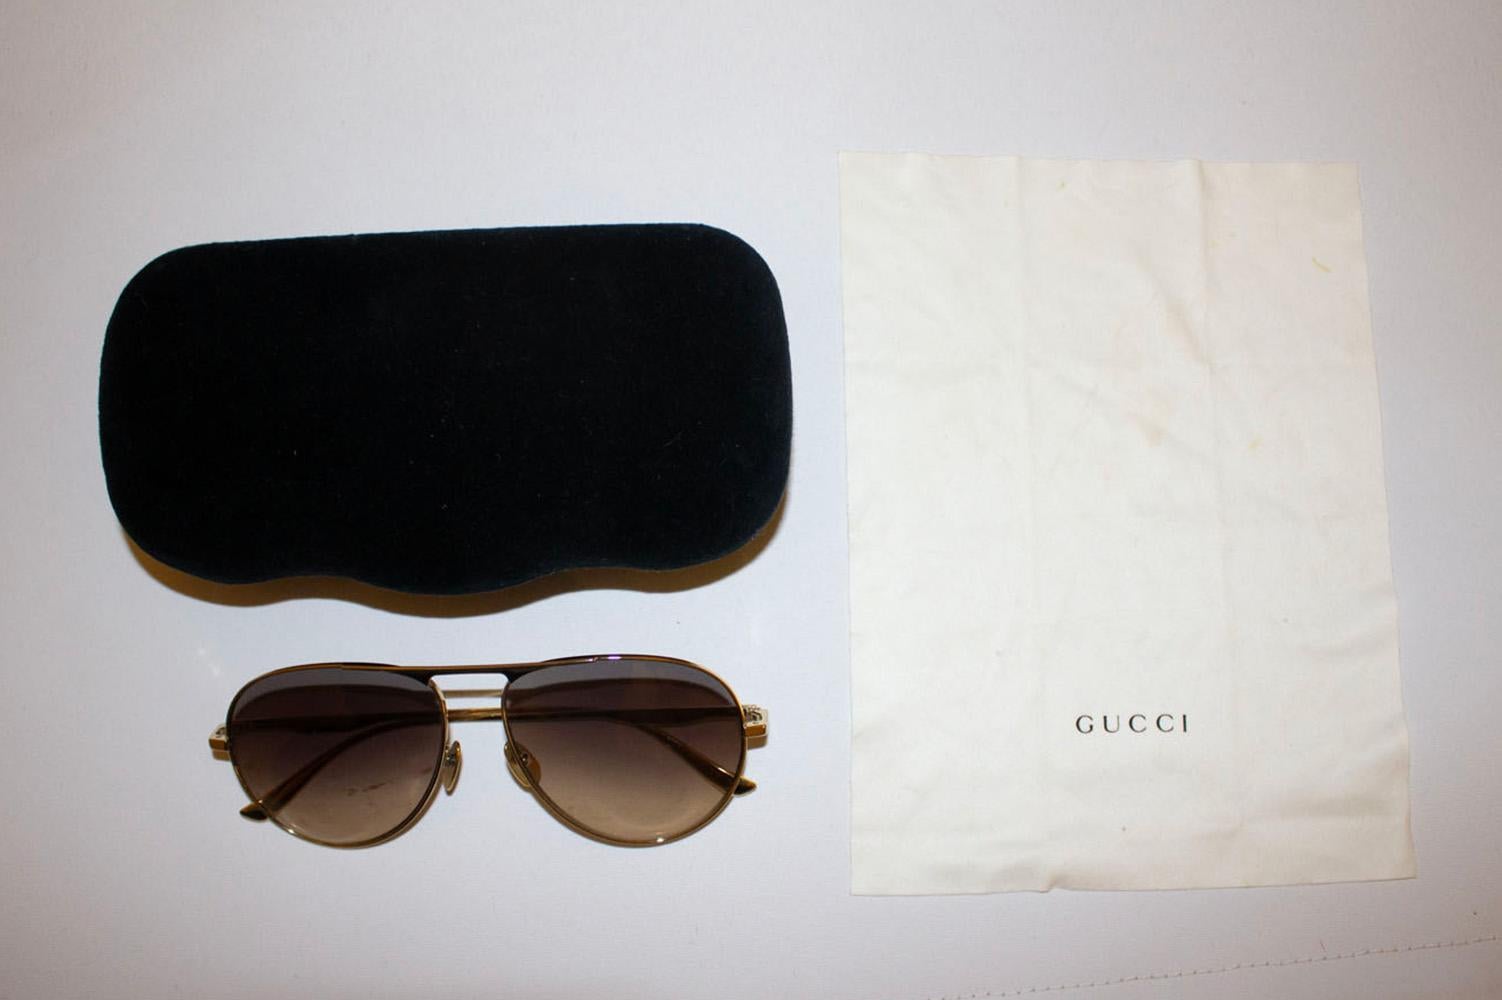 Gucci Gold Aviator Style Sunglasses In Excellent Condition For Sale In London, GB